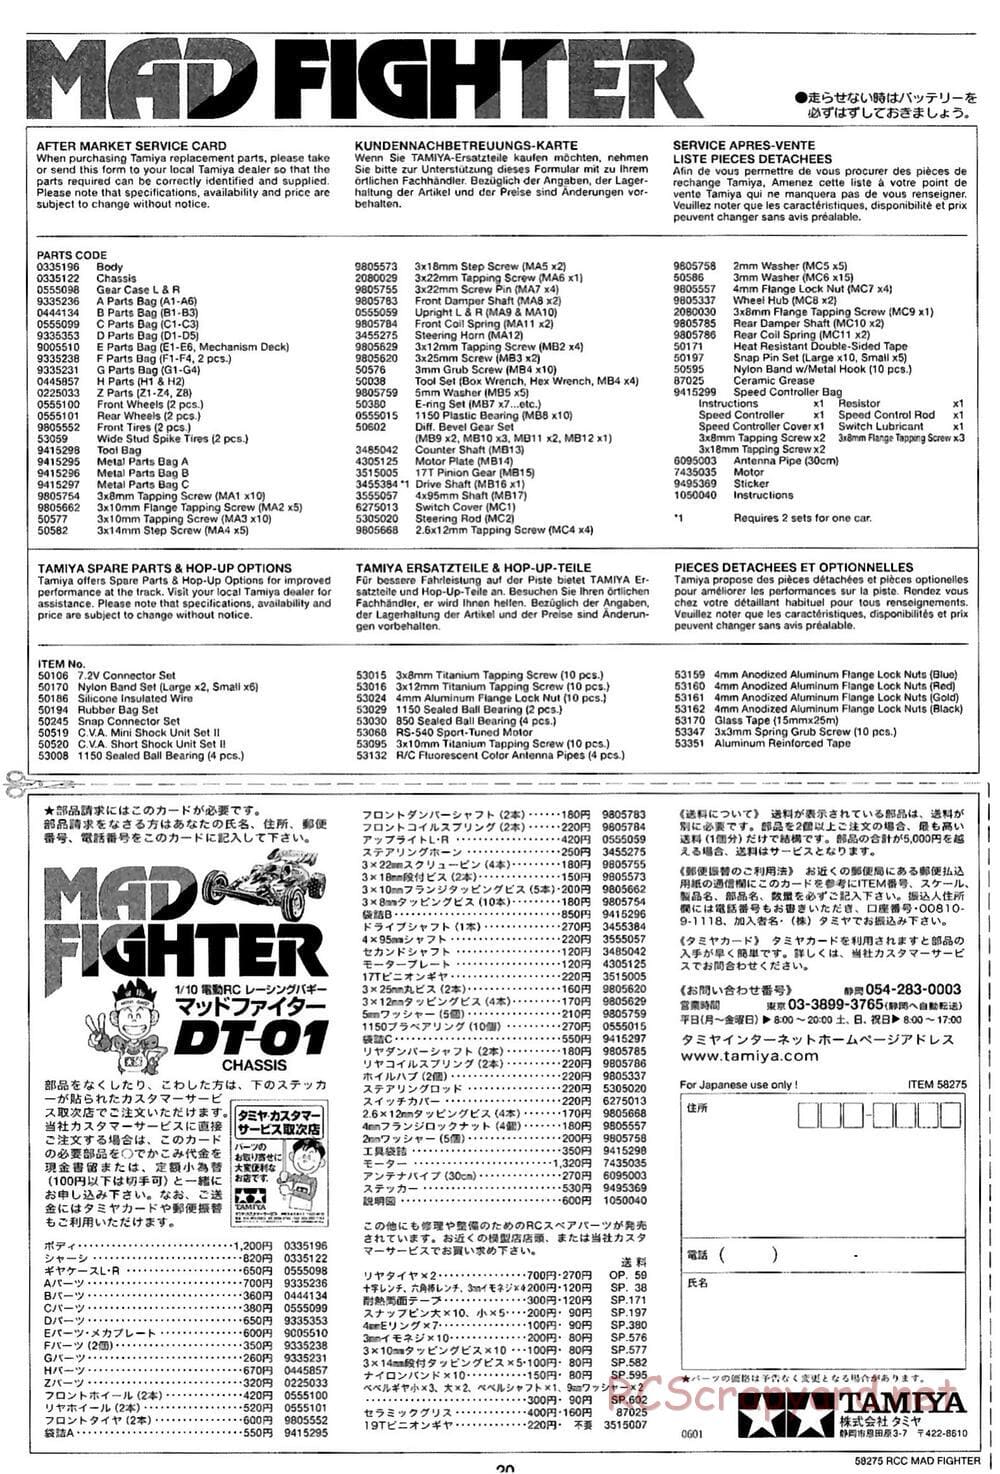 Tamiya - Mad Fighter Chassis - Manual - Page 20